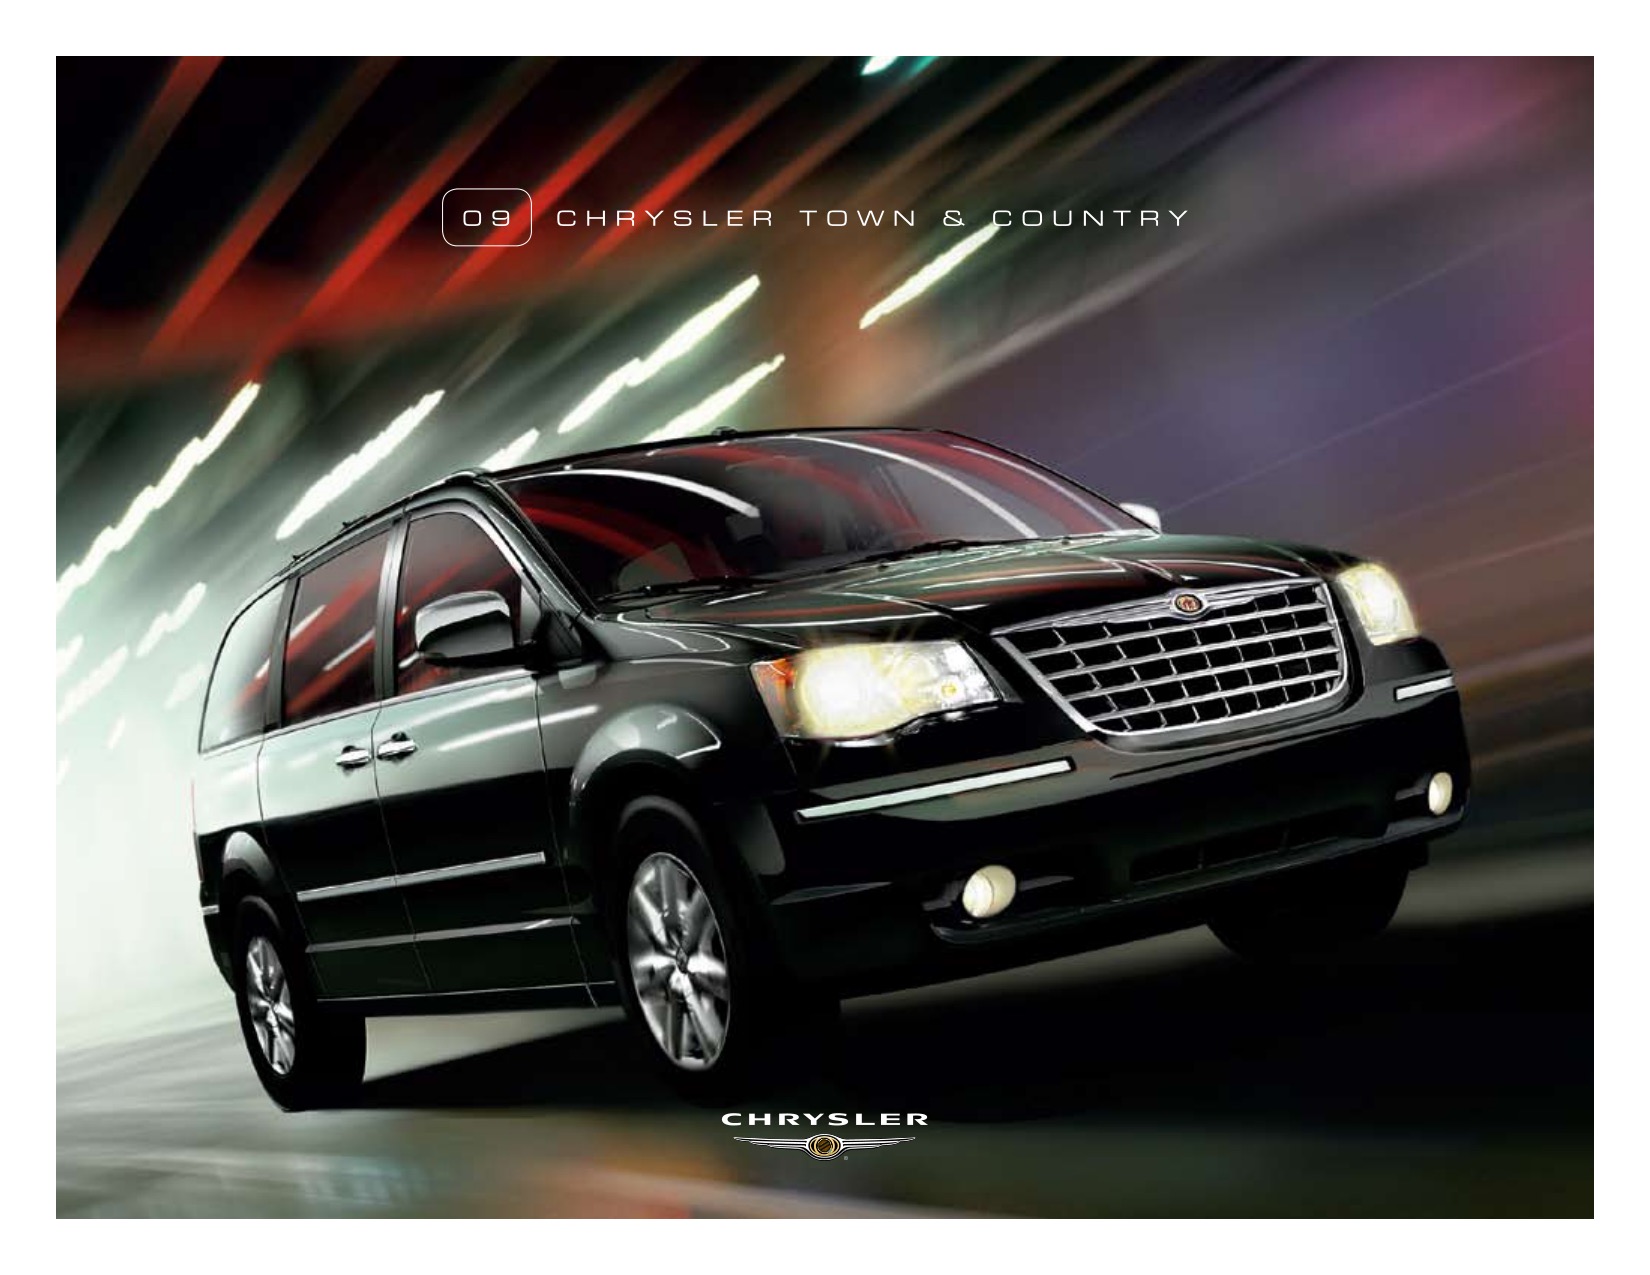 2009 Chrysler Town & Country Brochure